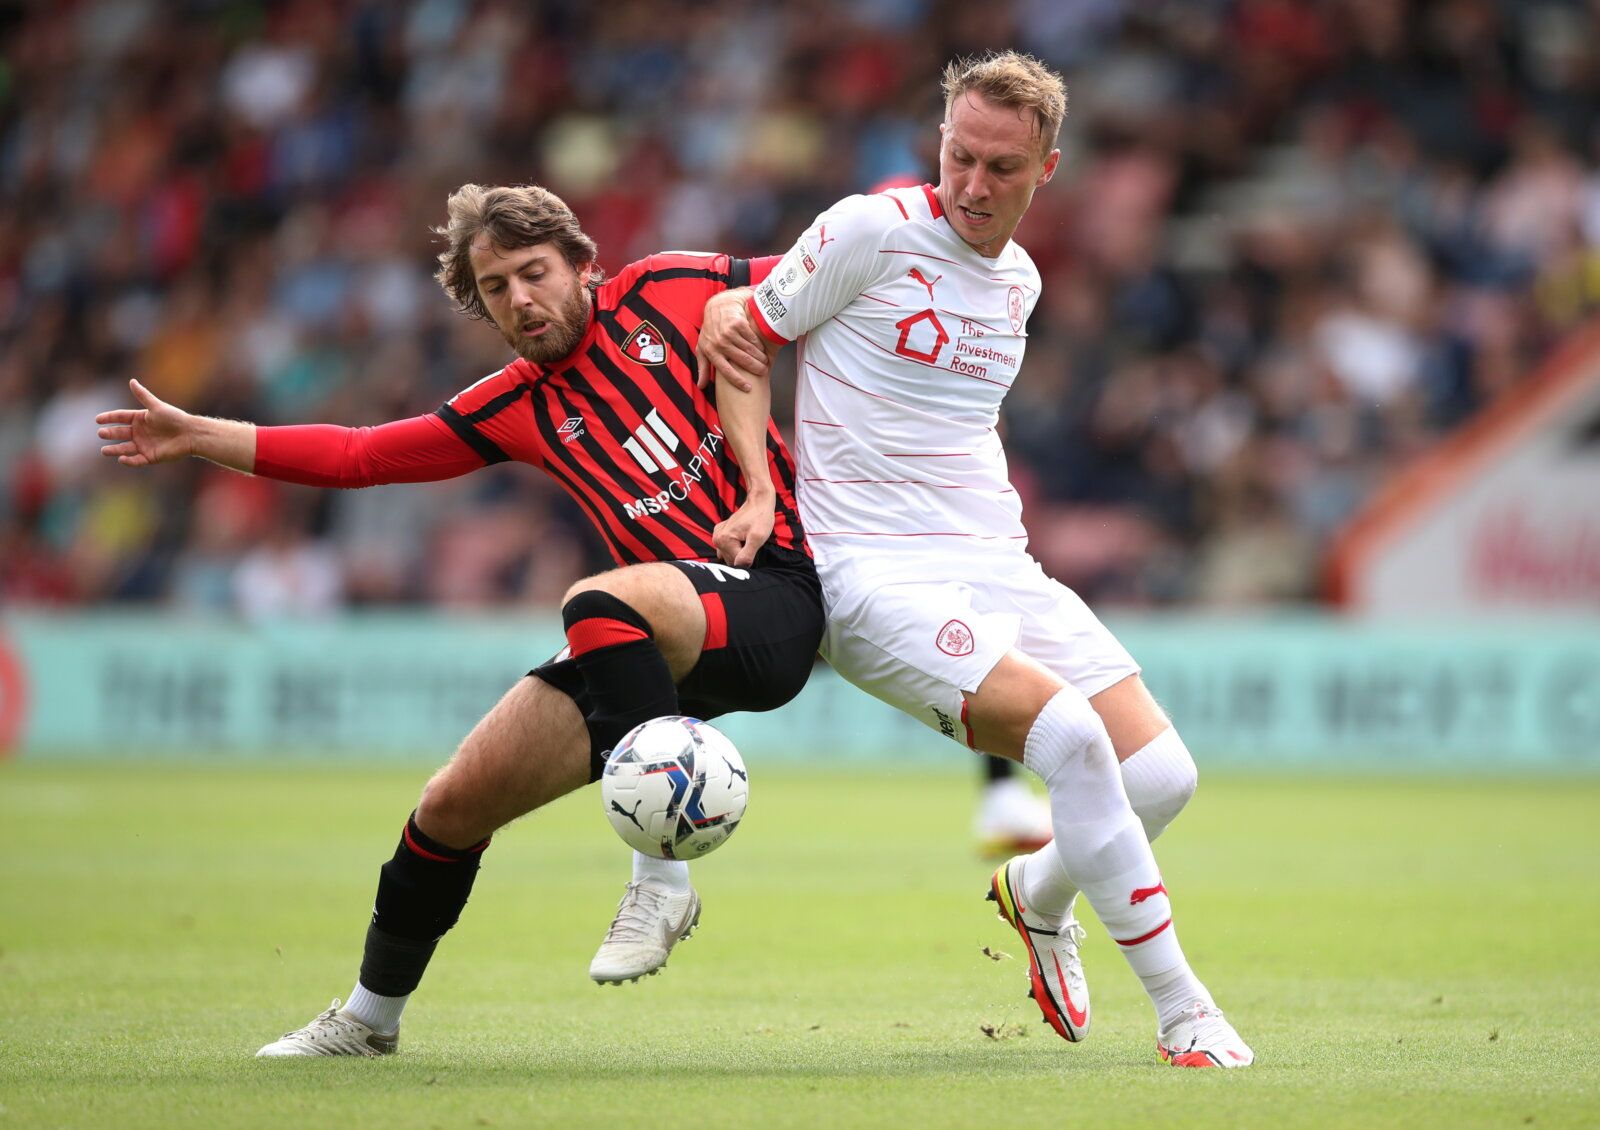 Soccer Football - Championship - AFC Bournemouth v Barnsley - Vitality Stadium, Bournemouth, Britain - September 11, 2021  Bournemouth?s Ben Pearson in action with Barnsley?s Cauley Woodrow  Action Images/Peter Cziborra  EDITORIAL USE ONLY. No use with unauthorized audio, video, data, fixture lists, club/league logos or 